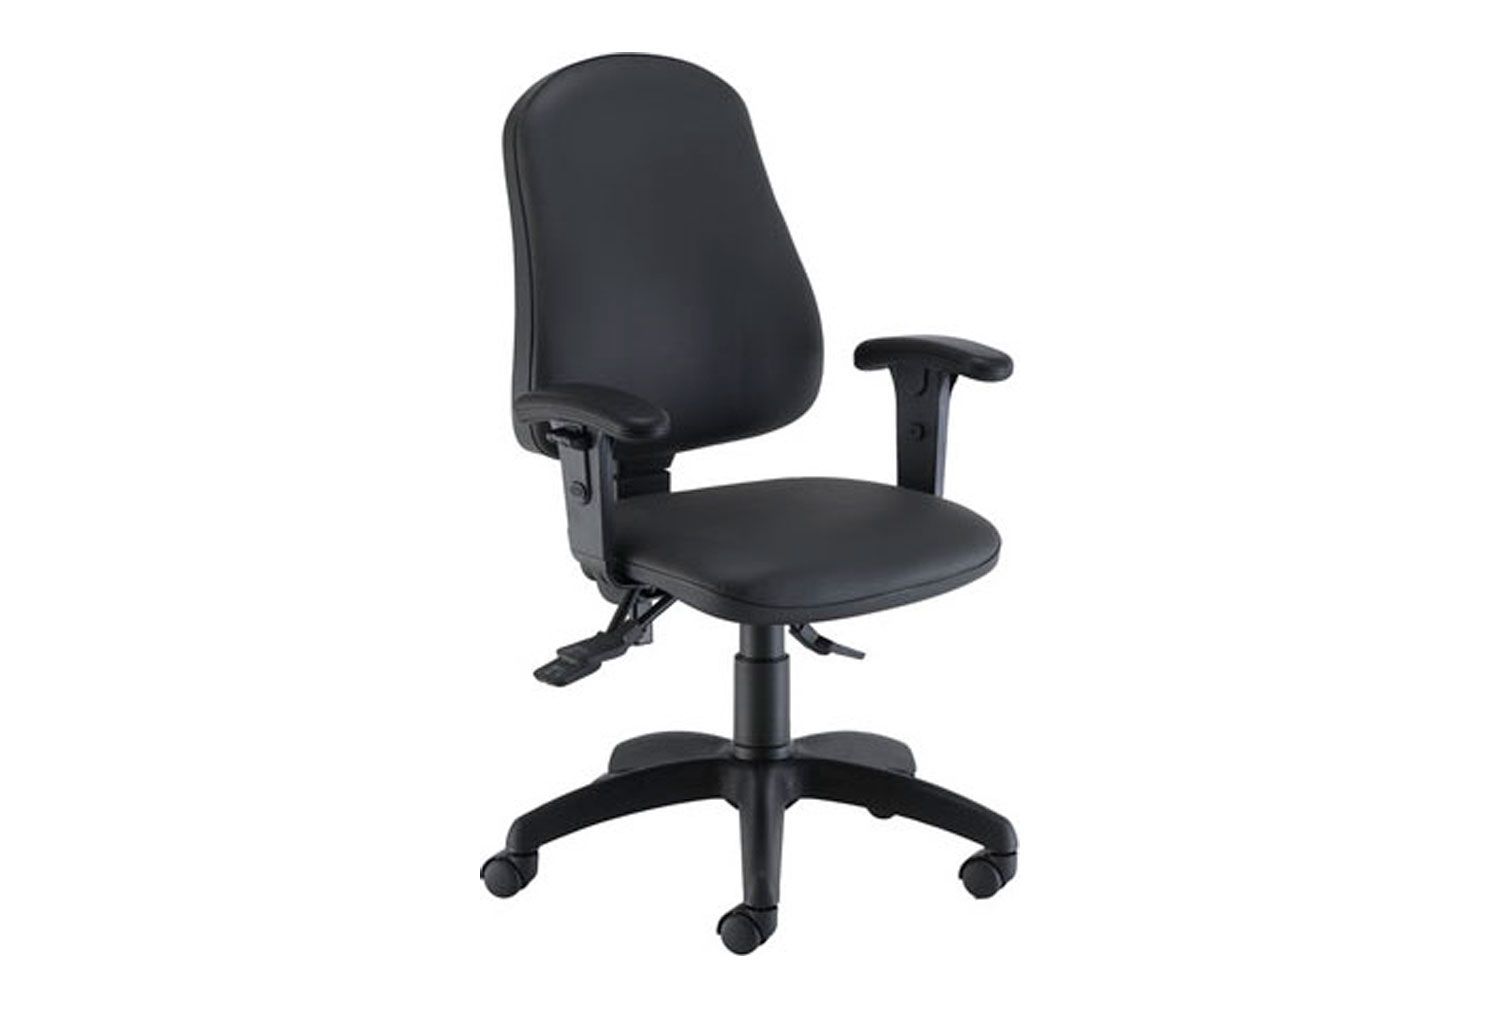 Orchid High Back Polyurethane Operator Office Chair With Lumbar Pump & Adjustable Arms, Fully Installed